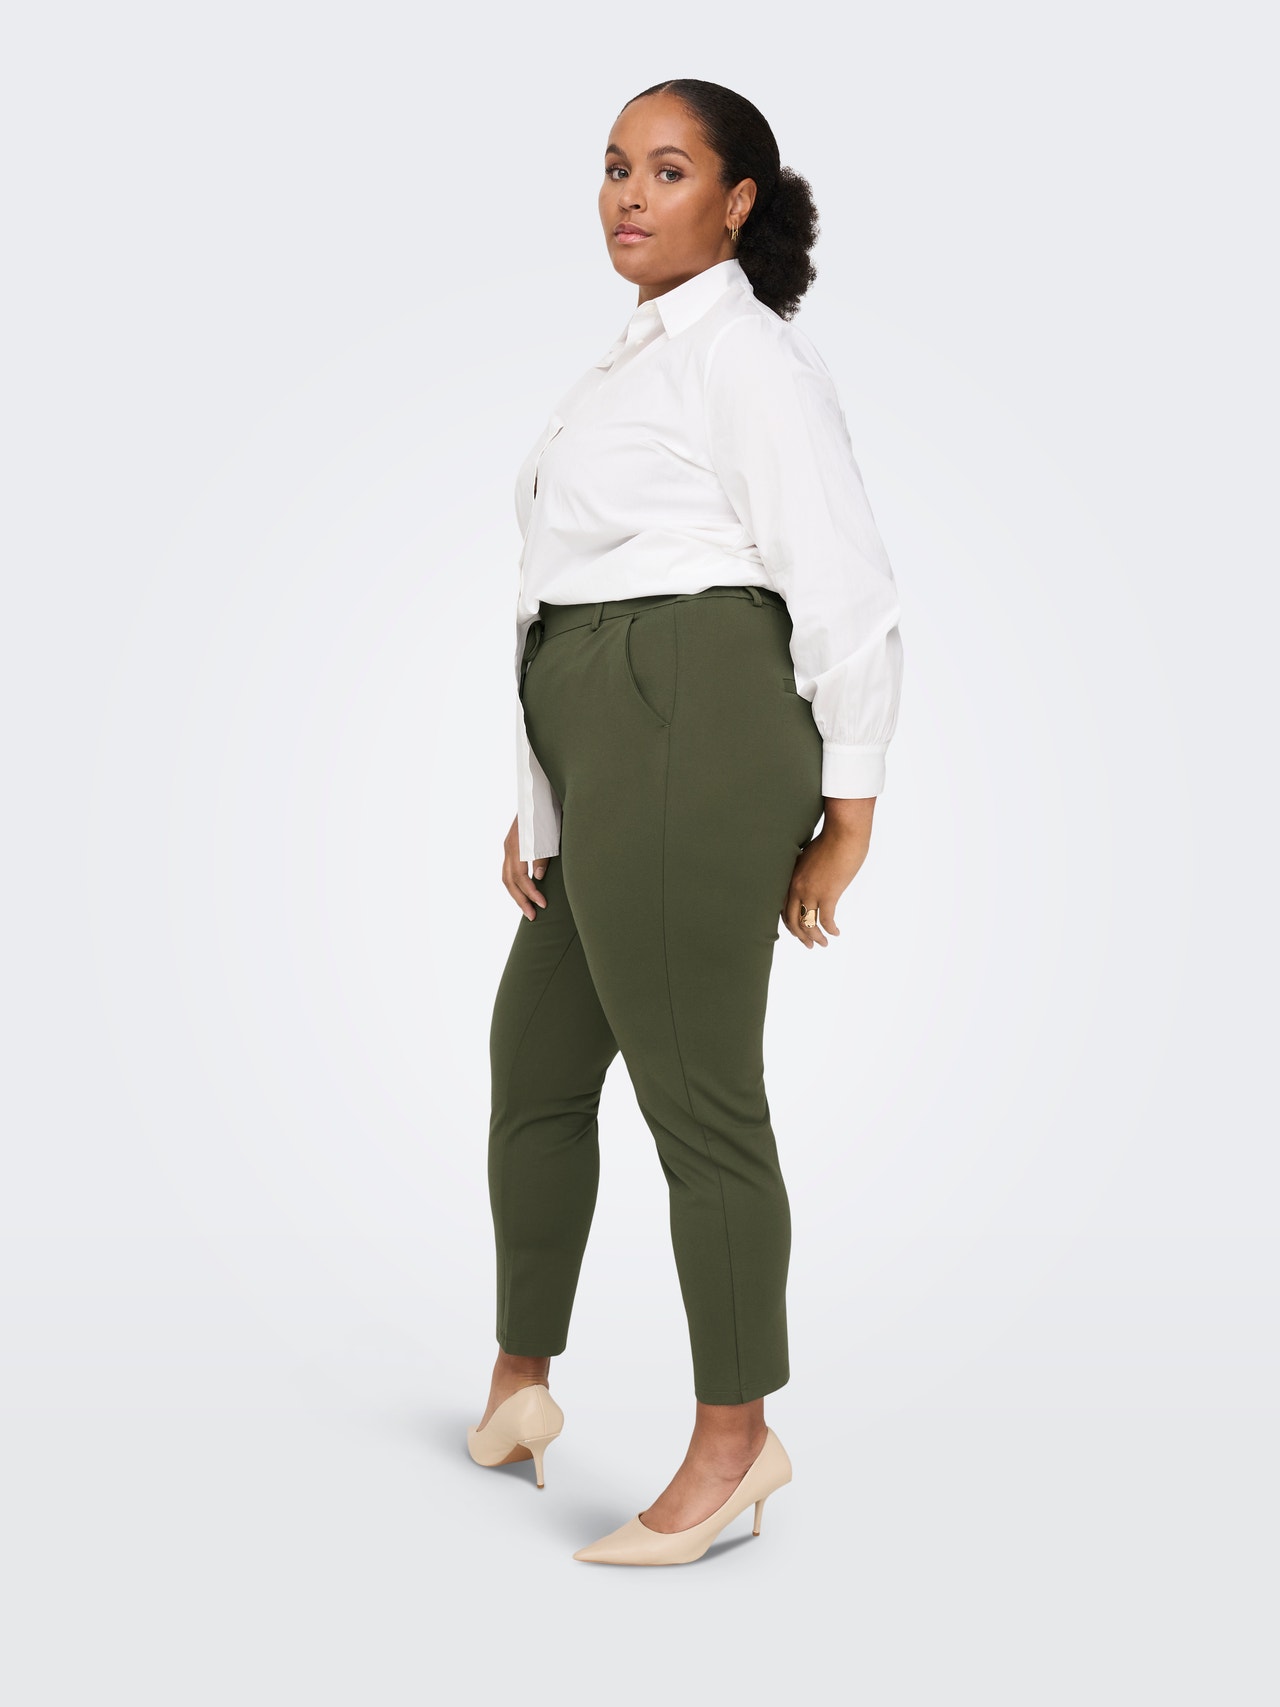 ONLY Regular Fit Trousers -Peat - 15174938